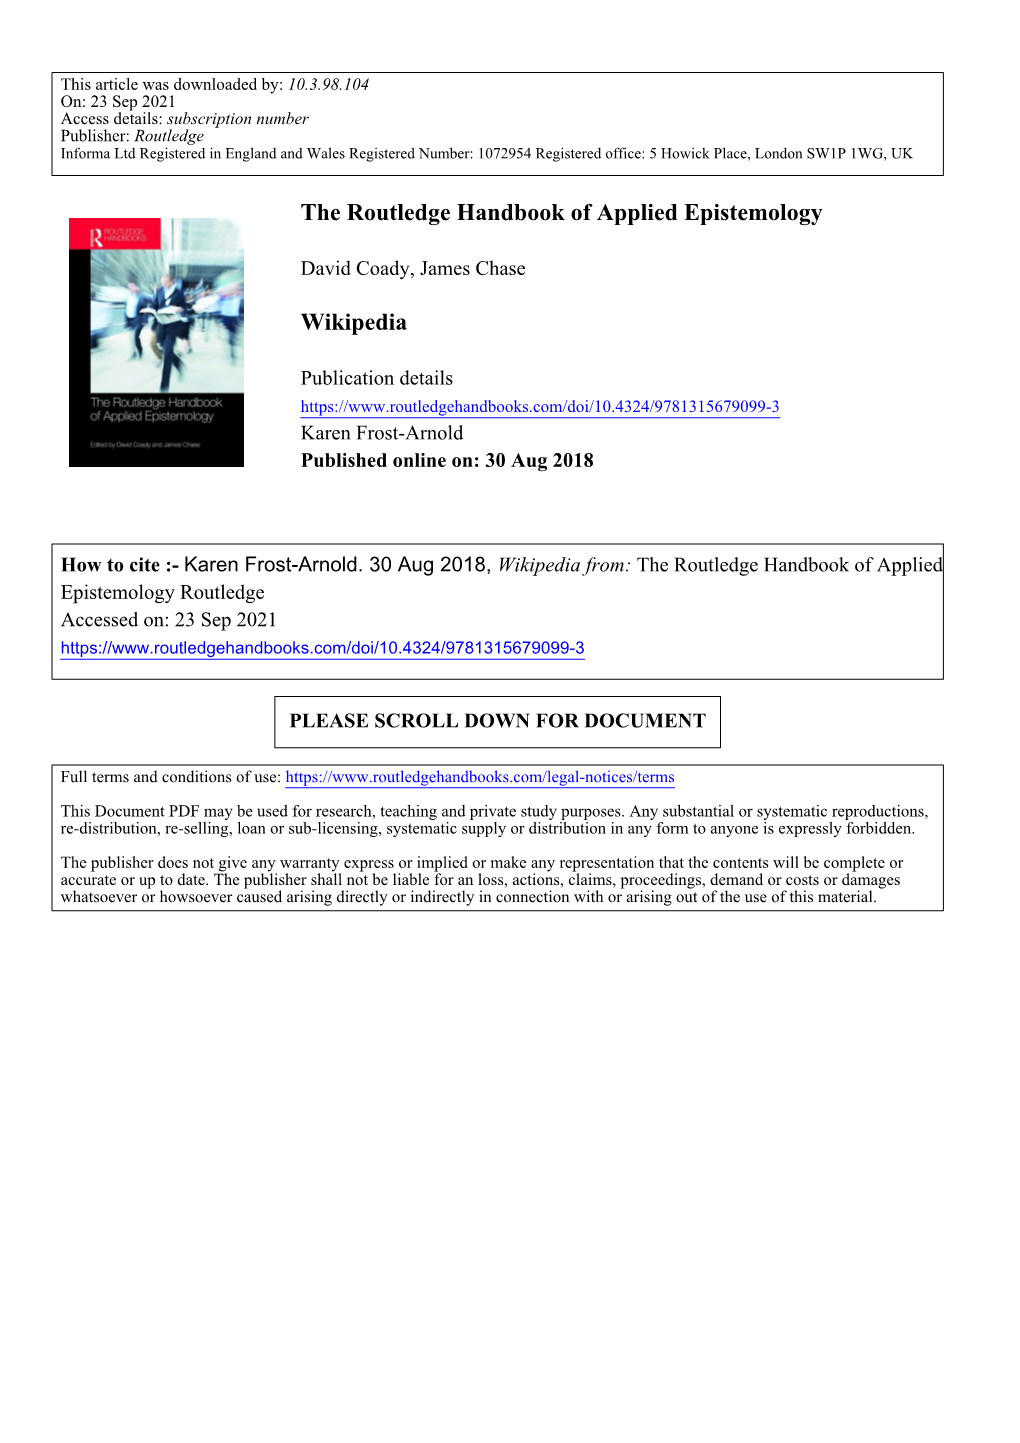 The Routledge Handbook of Applied Epistemology Wikipedia